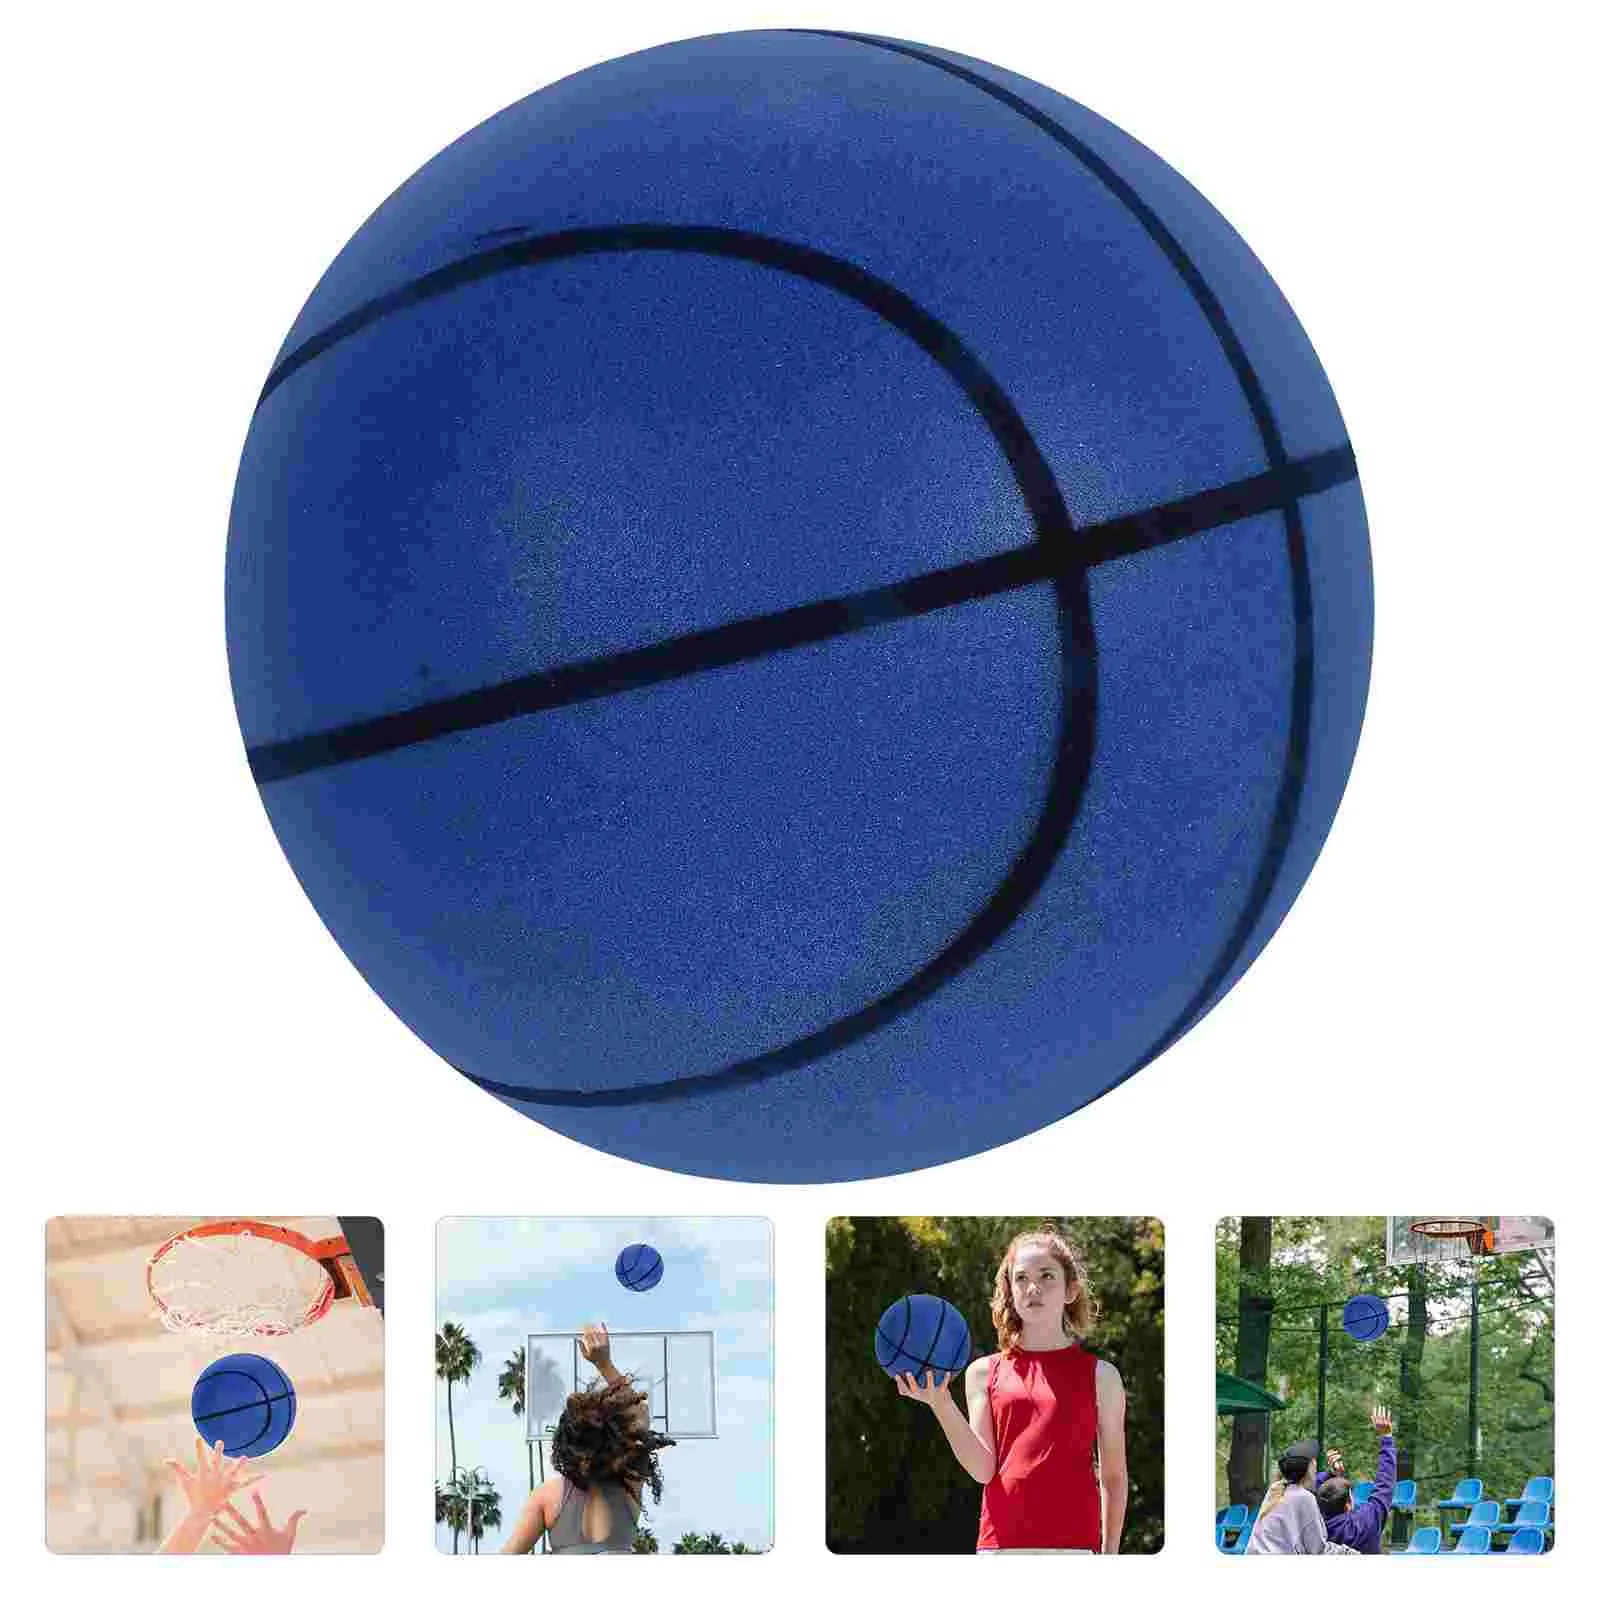 

Toy Patting Ball for Children Bouncy Elastic Educational Mute Jumping Playing Bouncing Polyurethane Balls Funny Lightweight